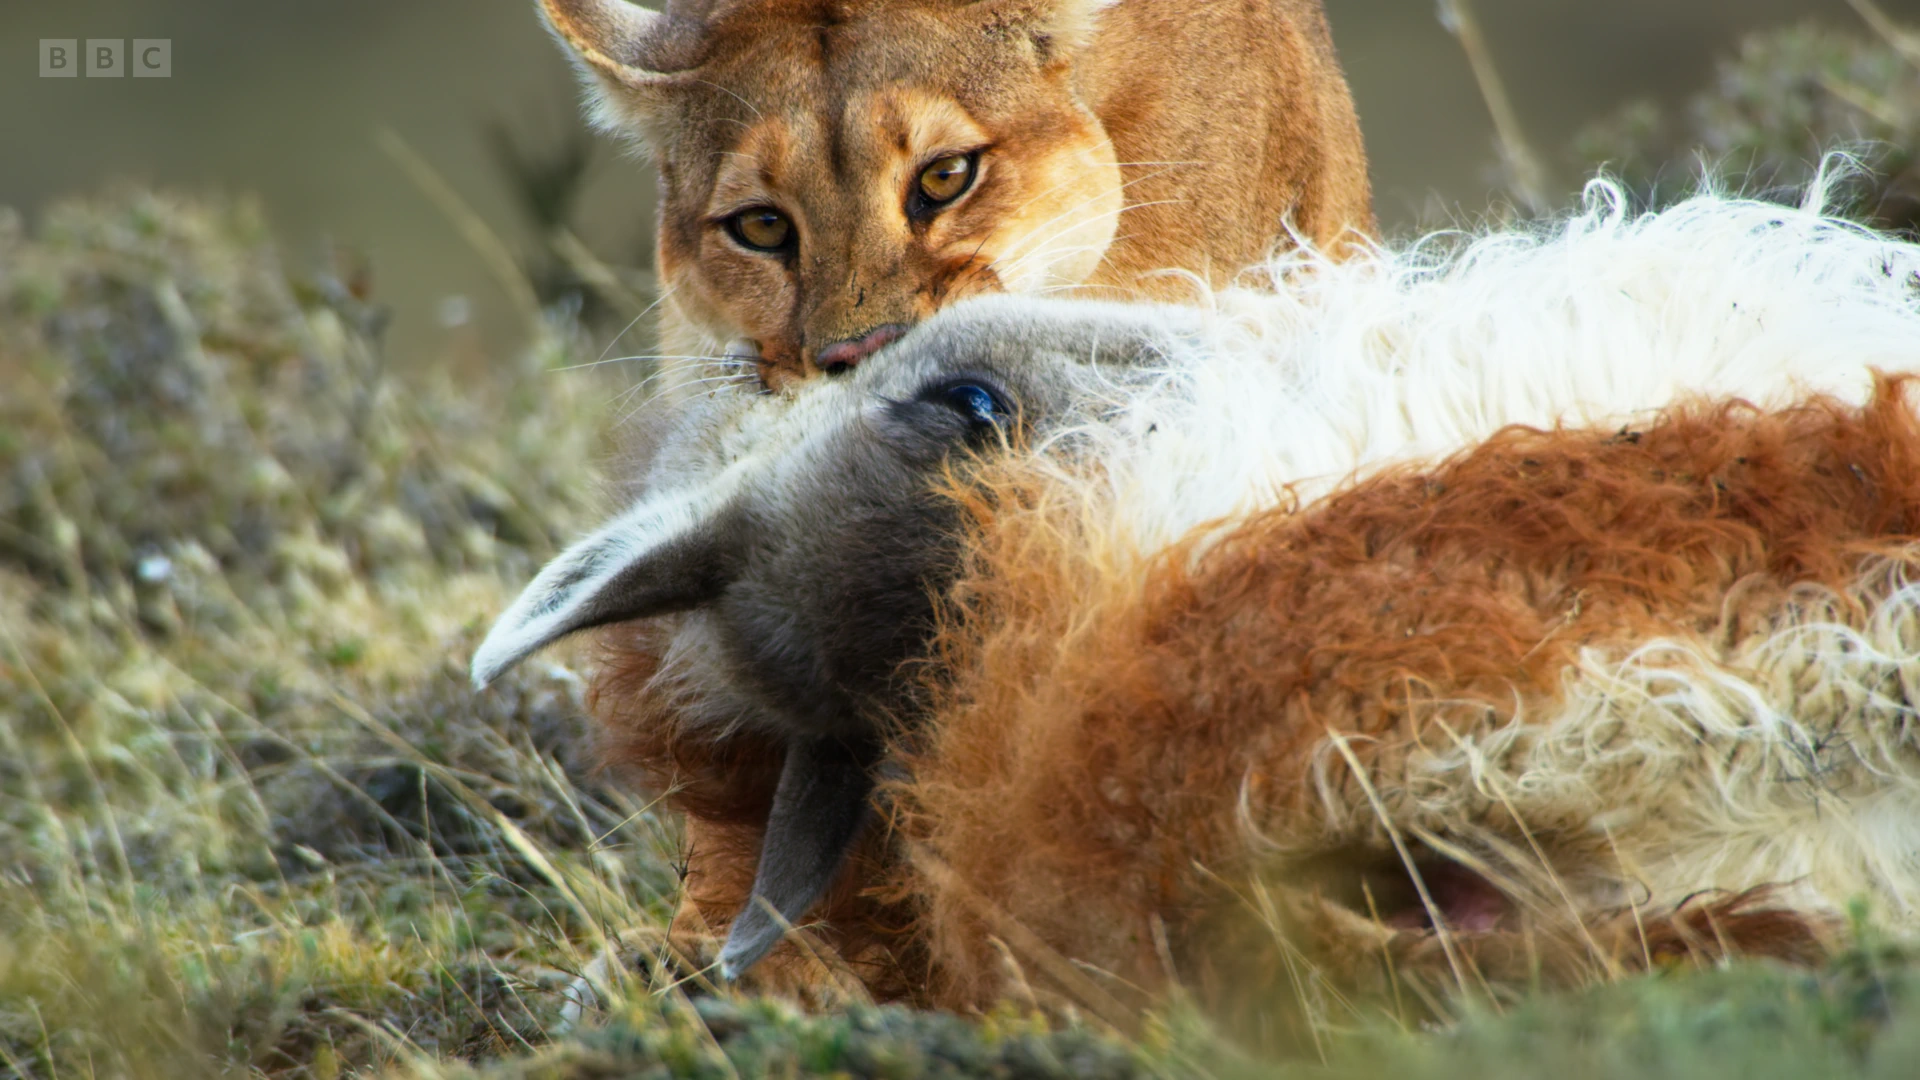 South American cougar (Puma concolor concolor) as shown in Seven Worlds, One Planet - South America